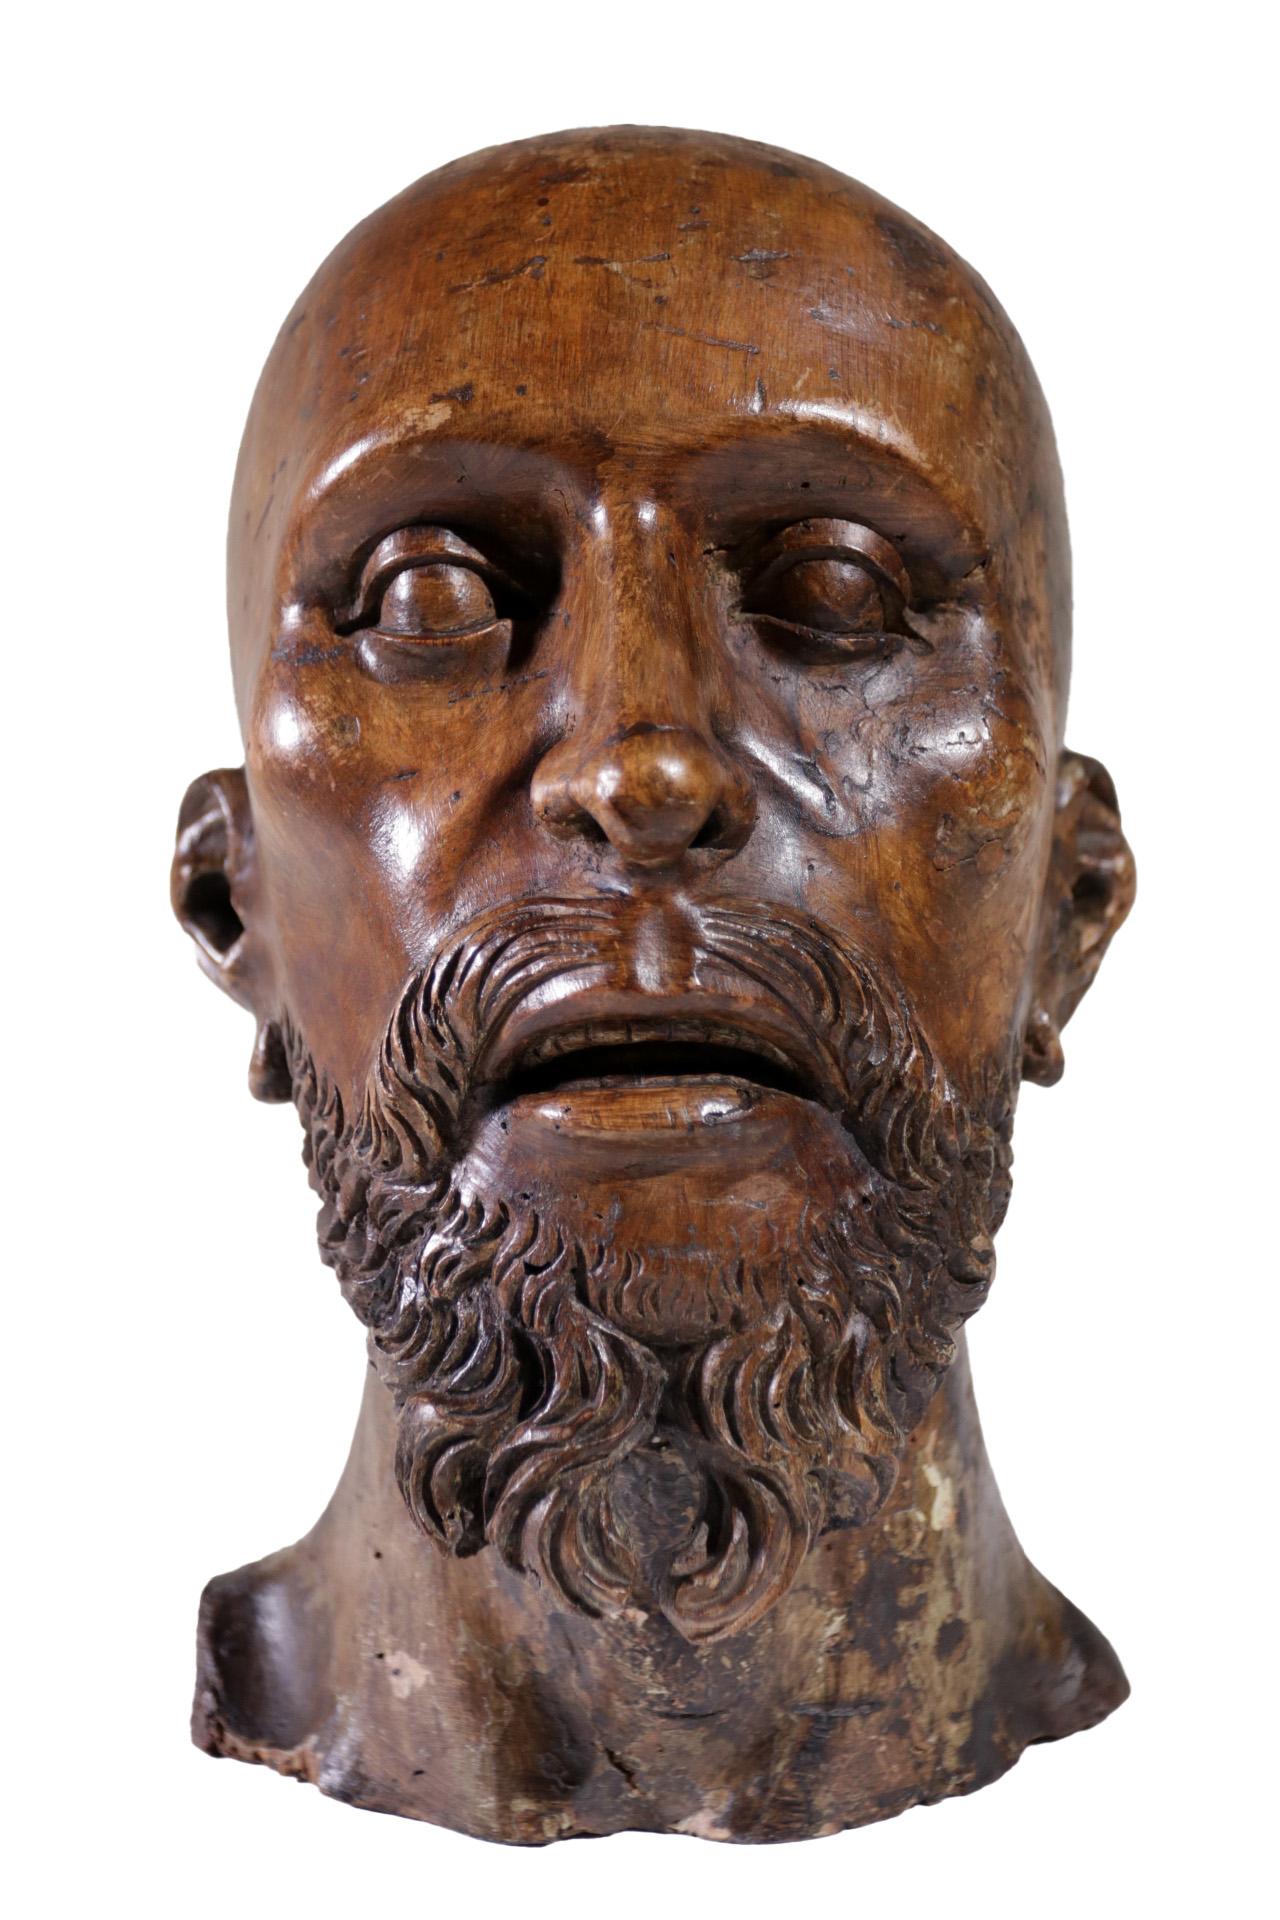 Stunning life-size carved wood sculpture of a man's head dating from circa 1700 in the south of Europe.
 